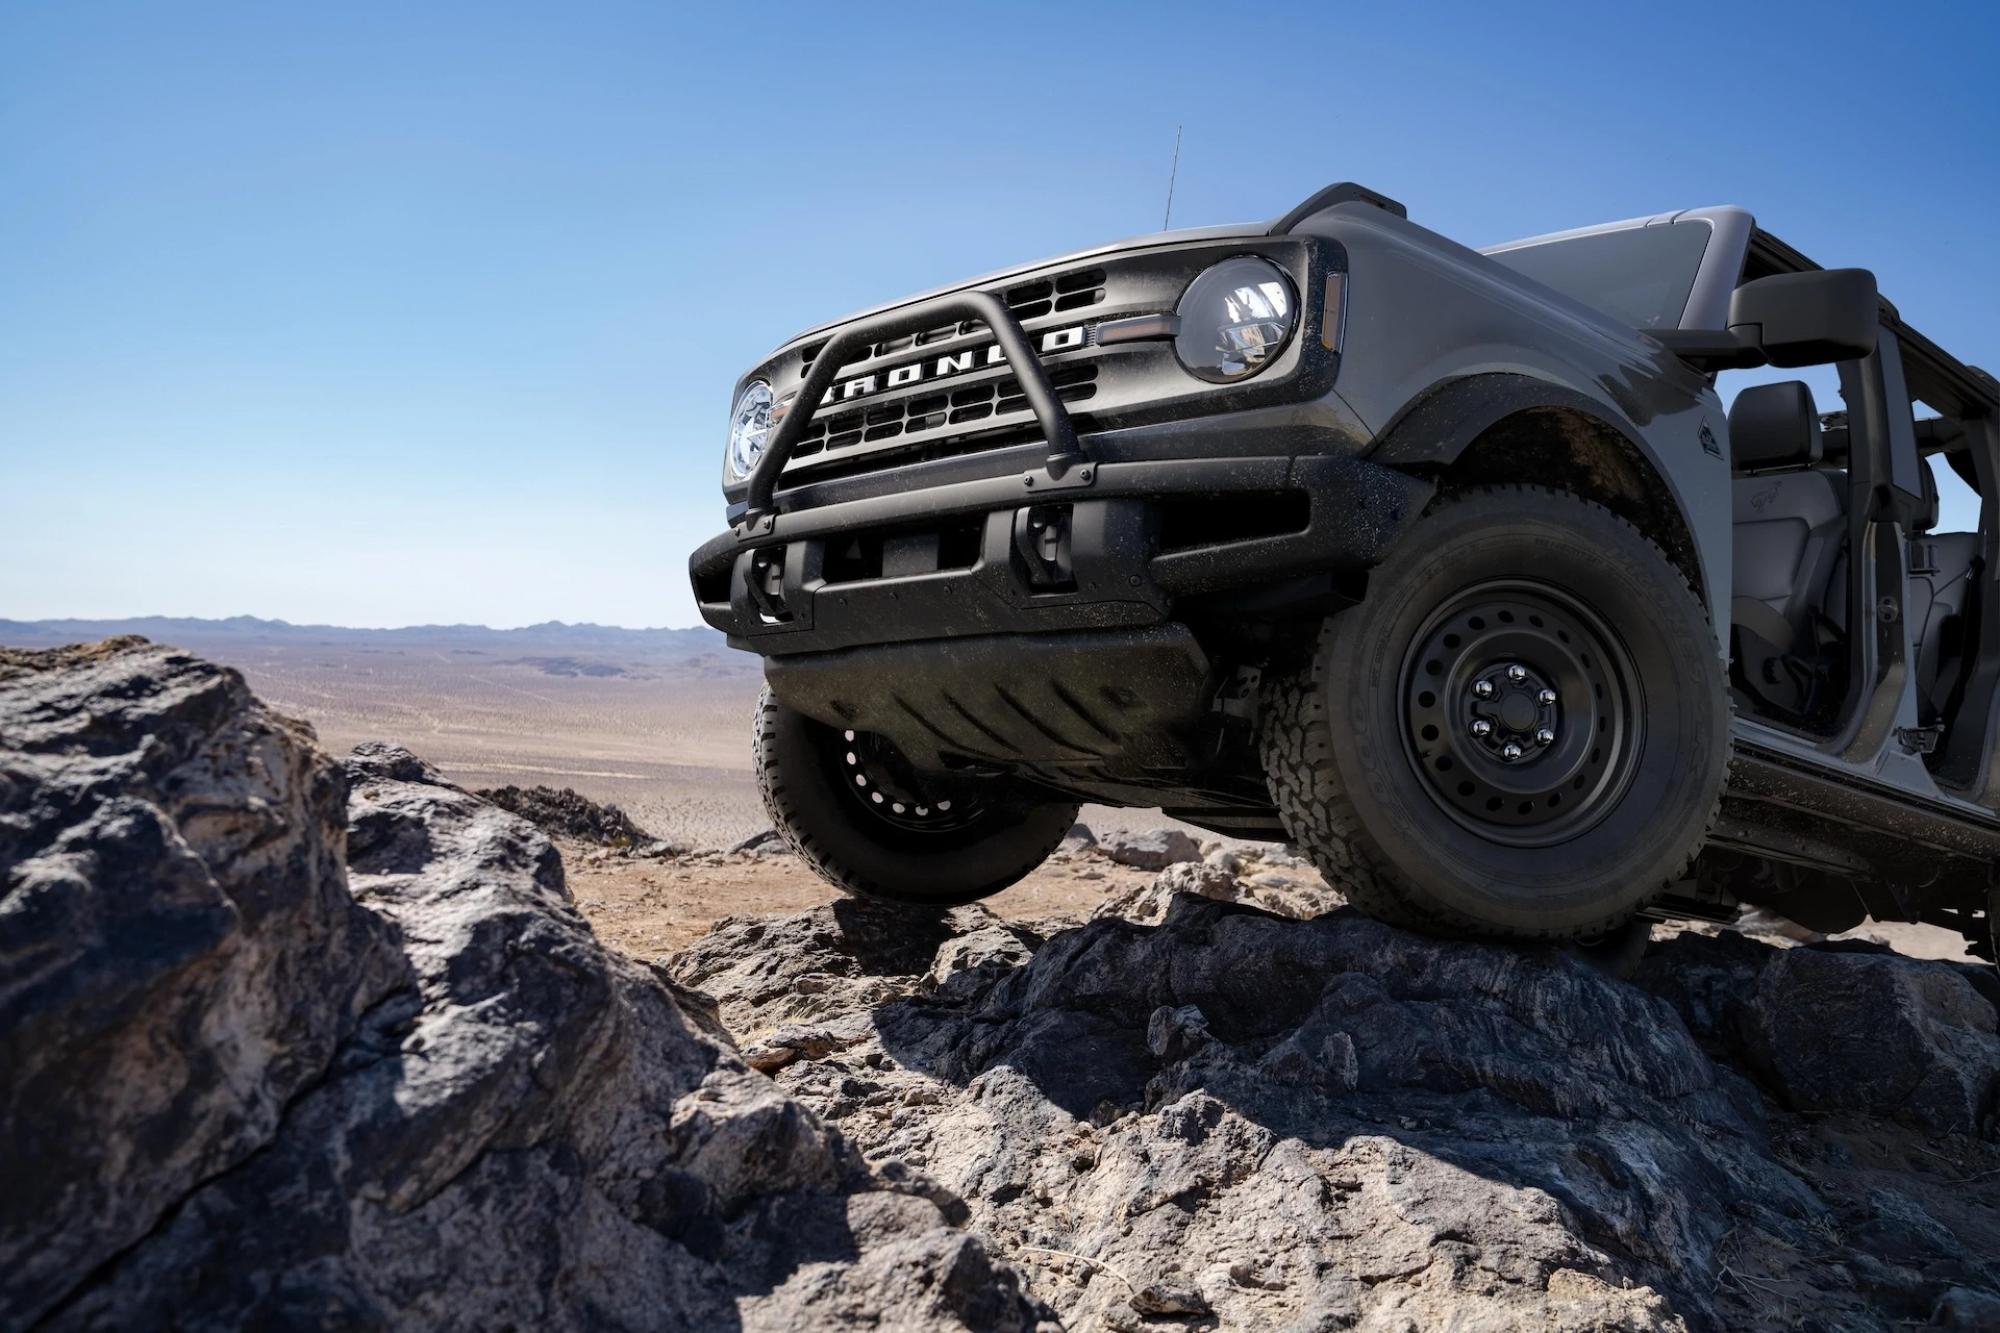 A Ford Bronco rock crawling